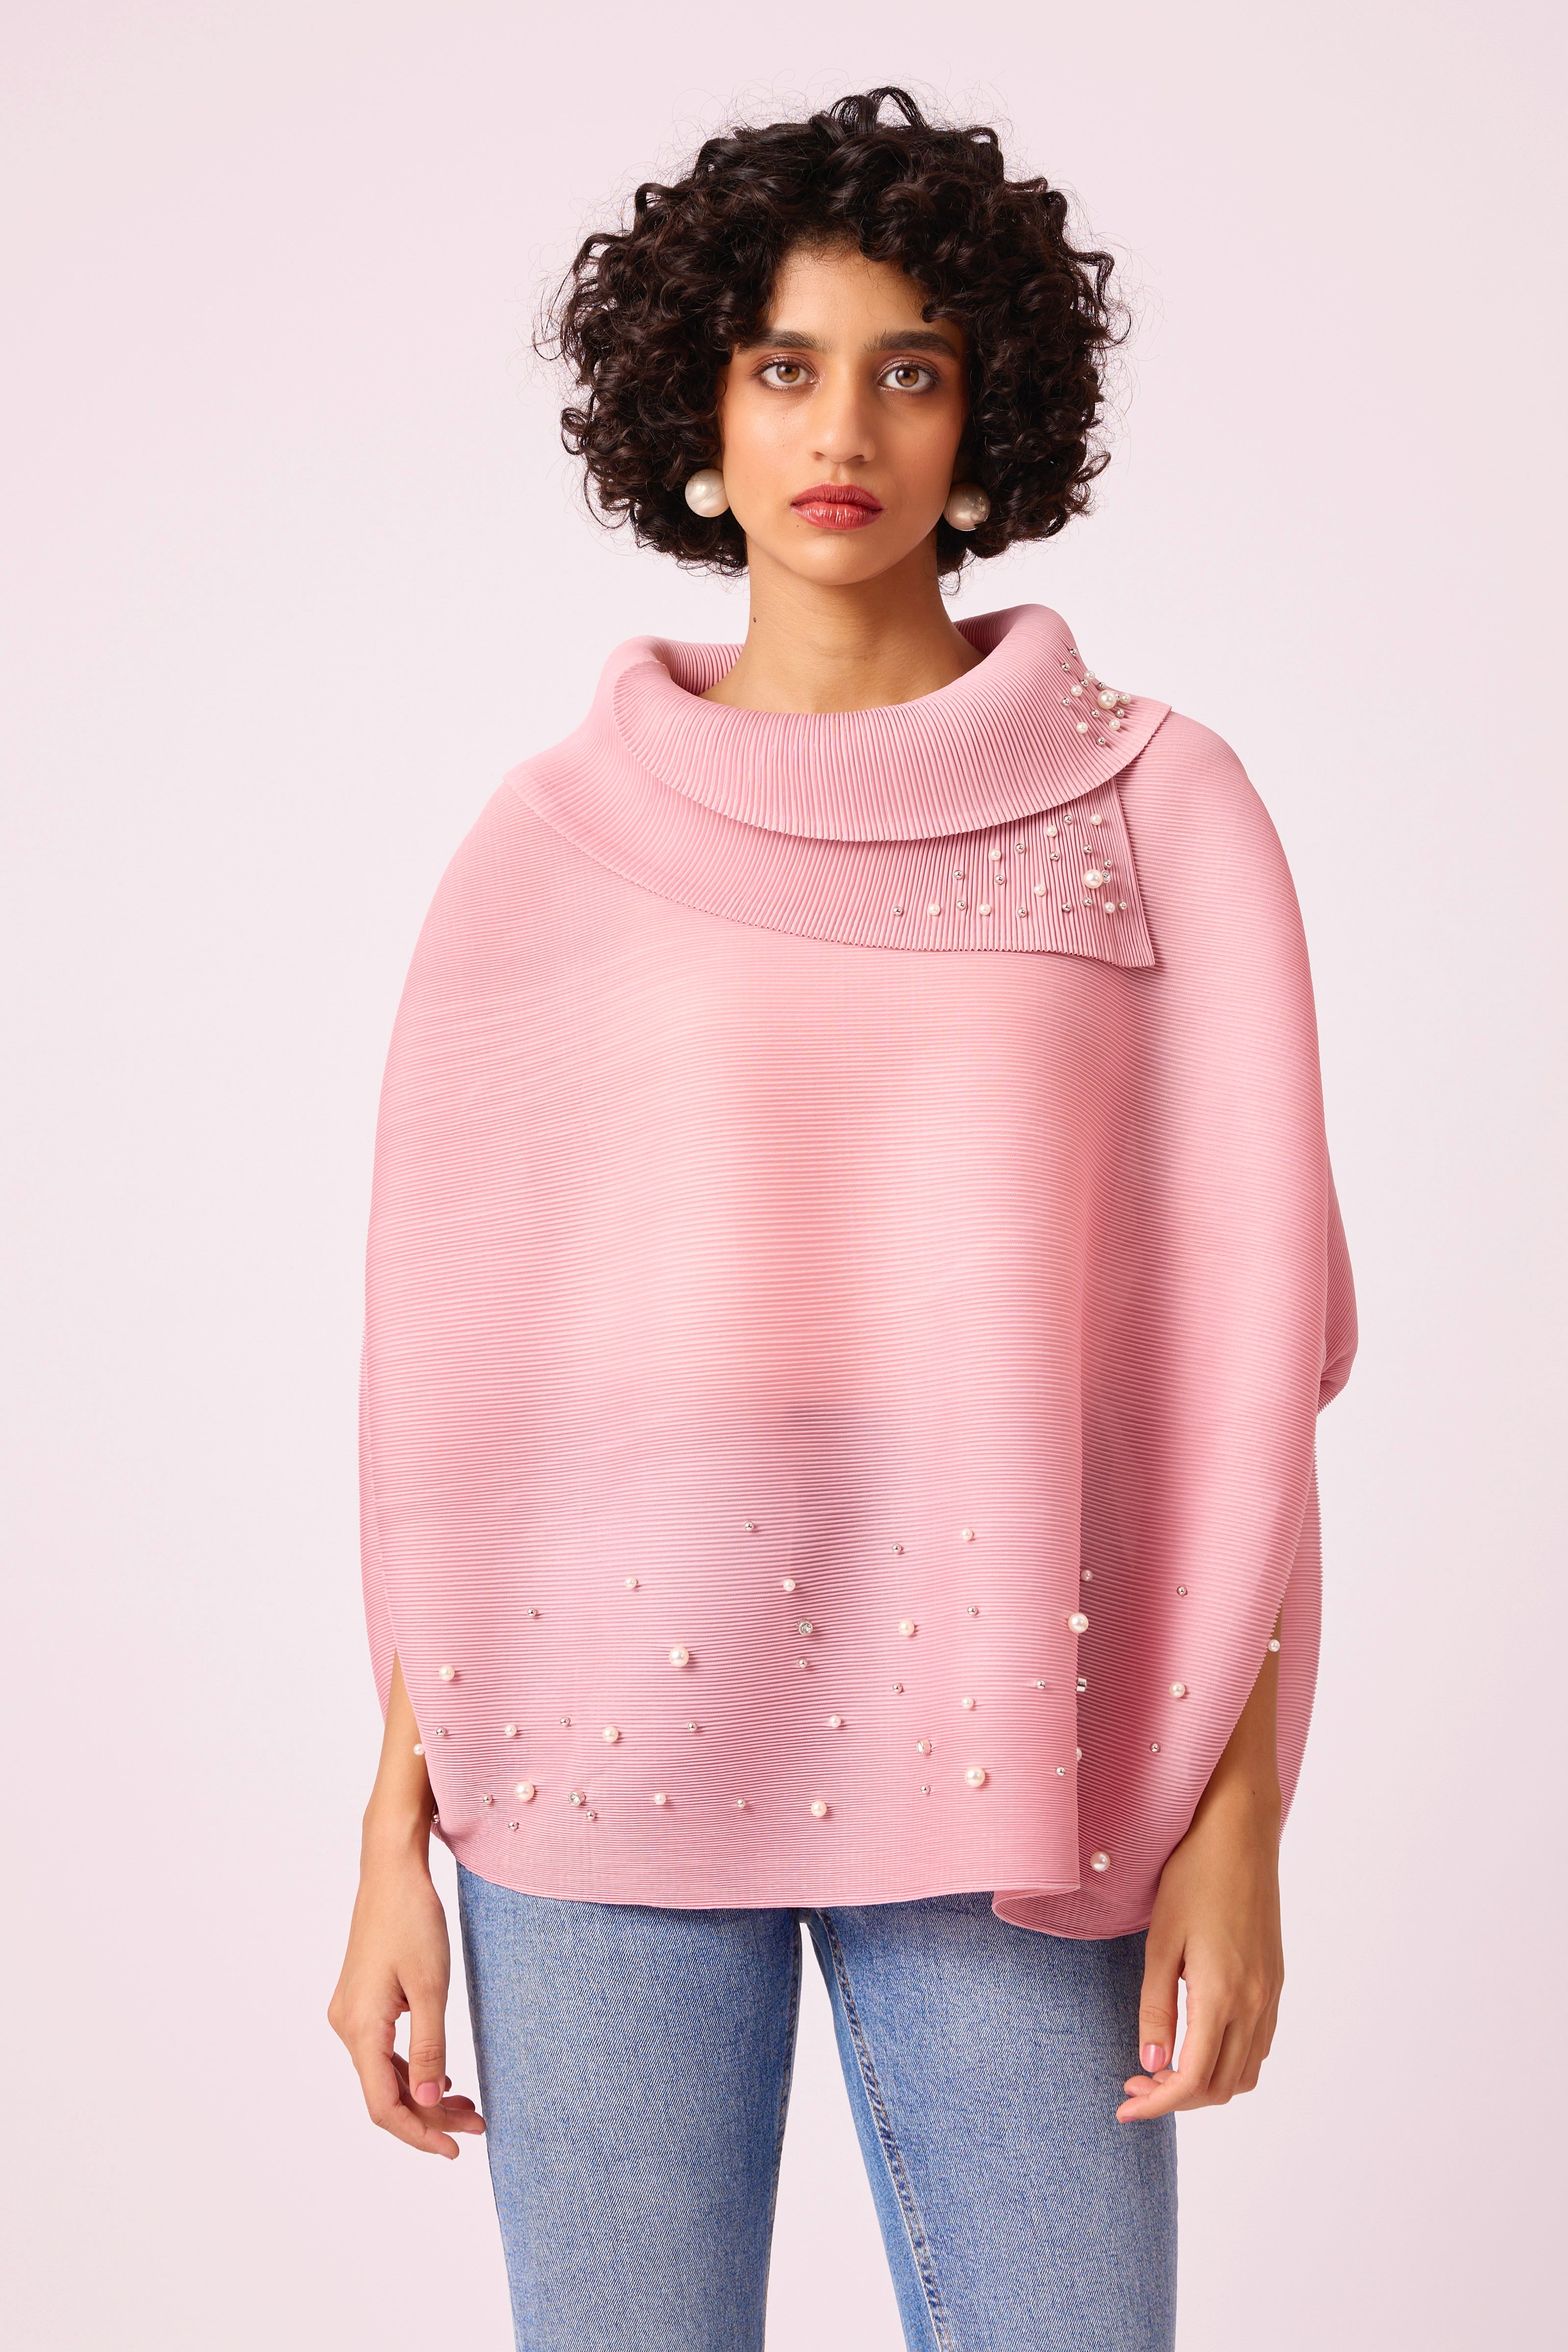 Sloane Pearled Batwing Top - Light Pink